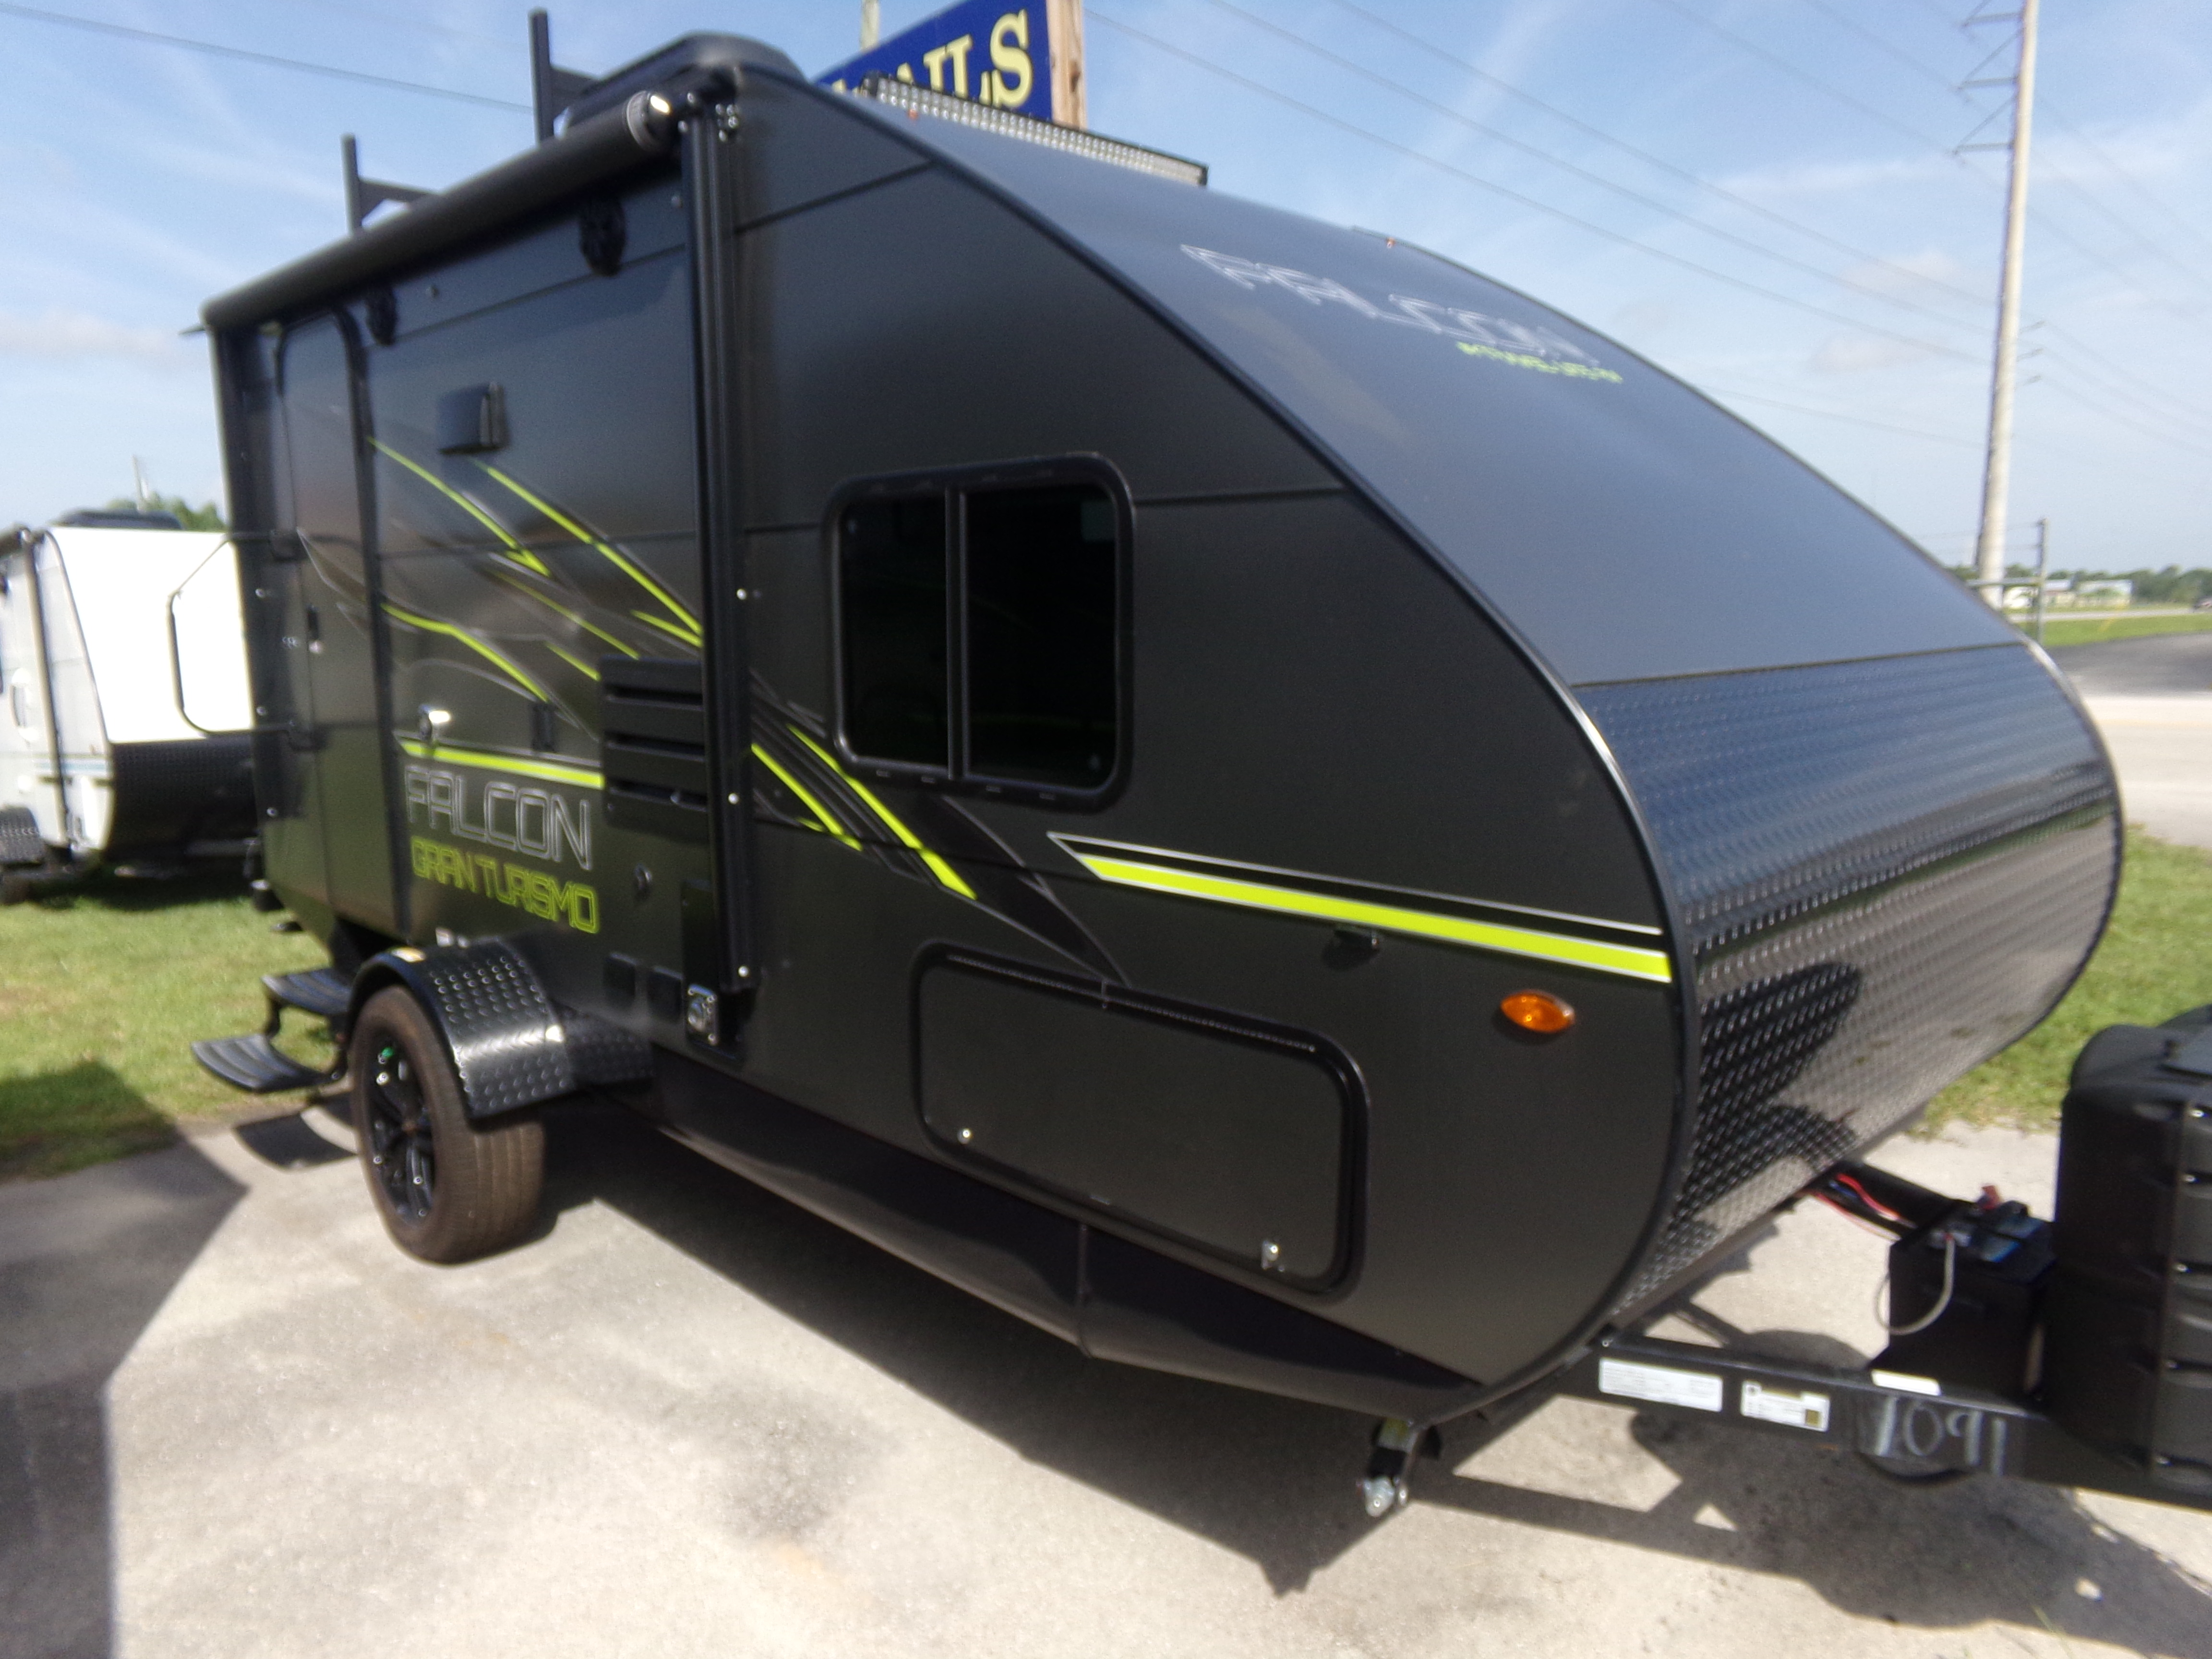 New 2019 Travel Lite Falcon F21RB Travel Trailers